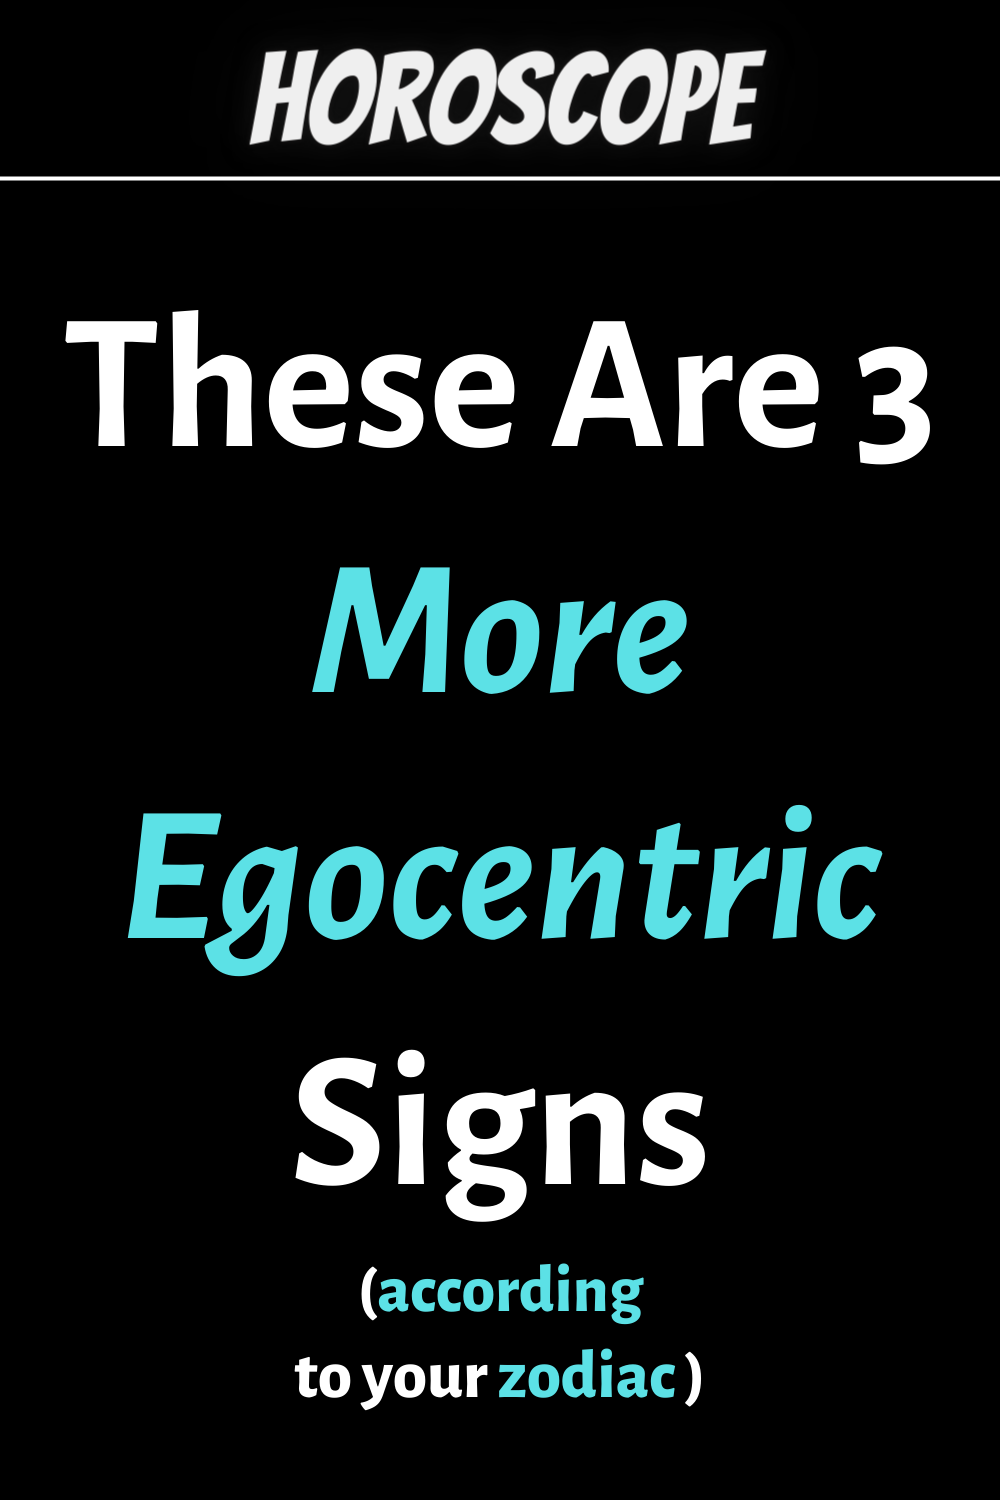 These Are 3 More Egocentric Signs